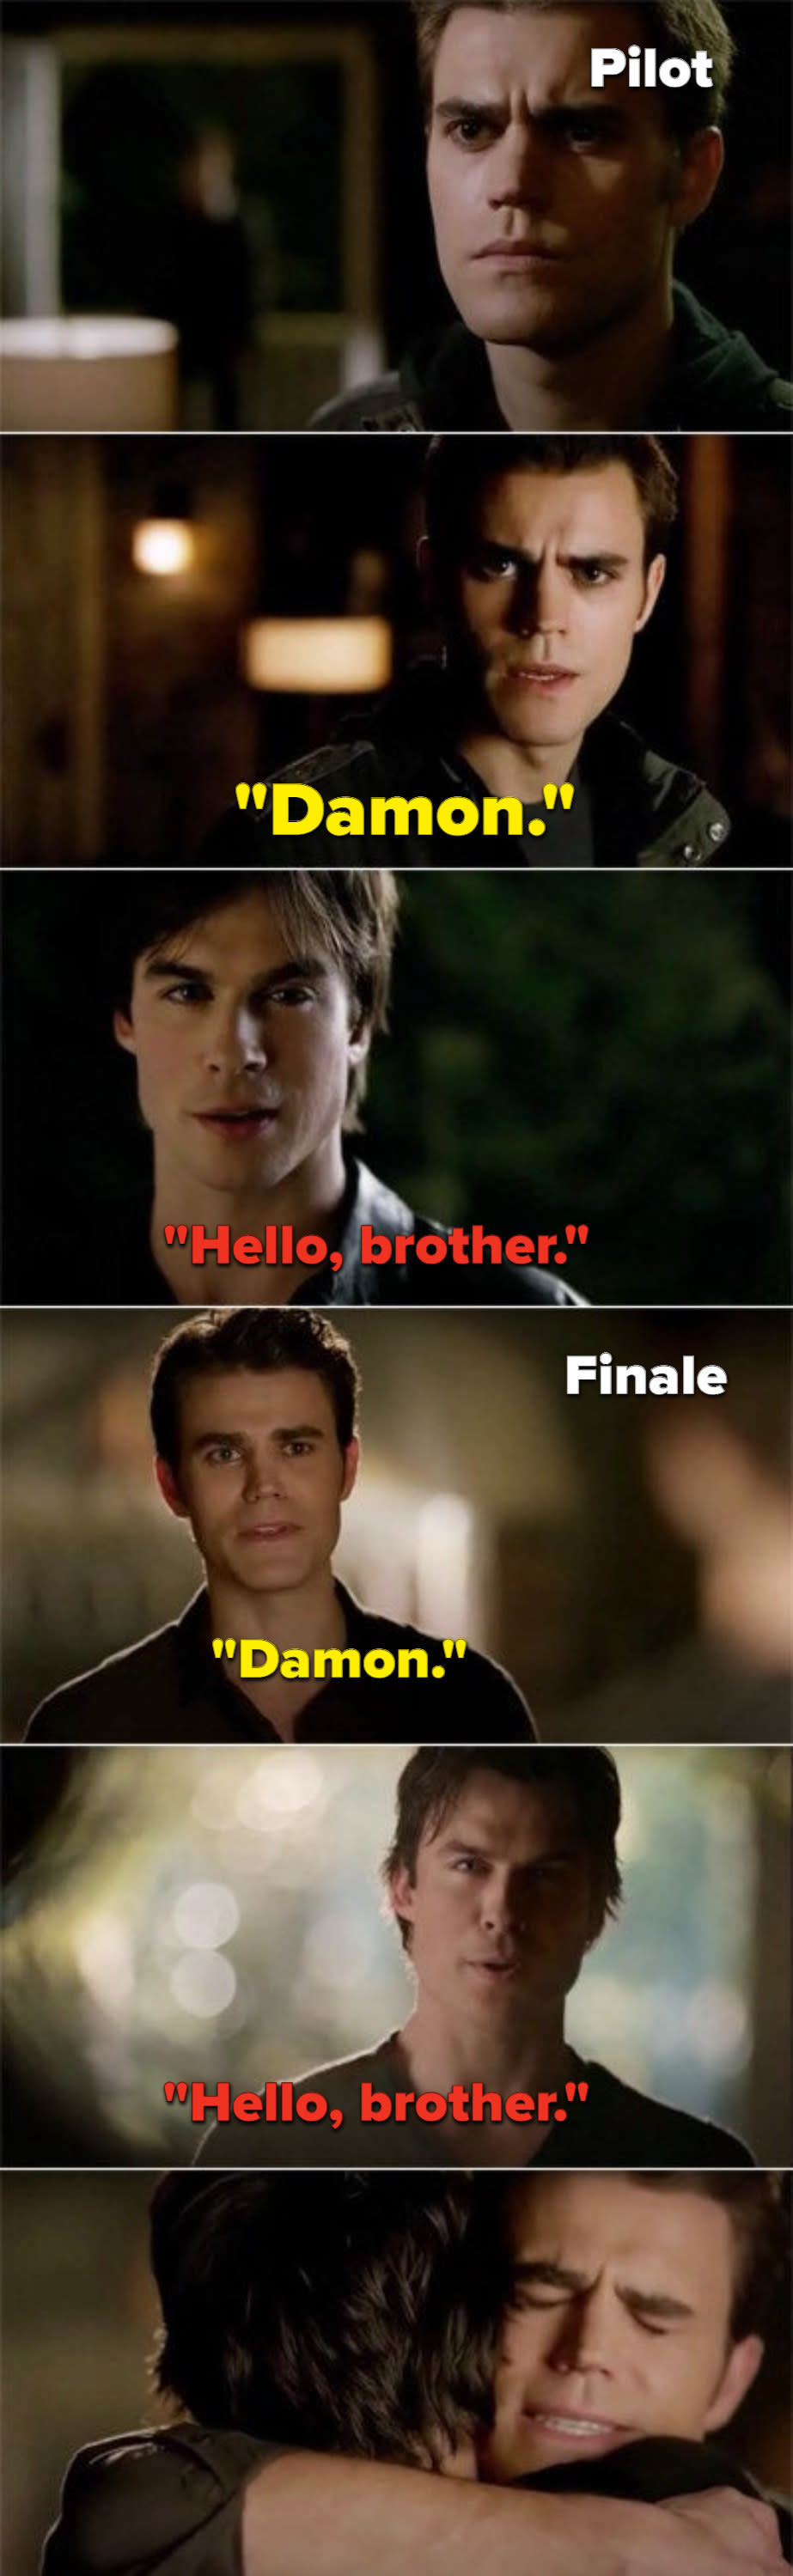 Damon saying "Hey brother" in the pilot and finale